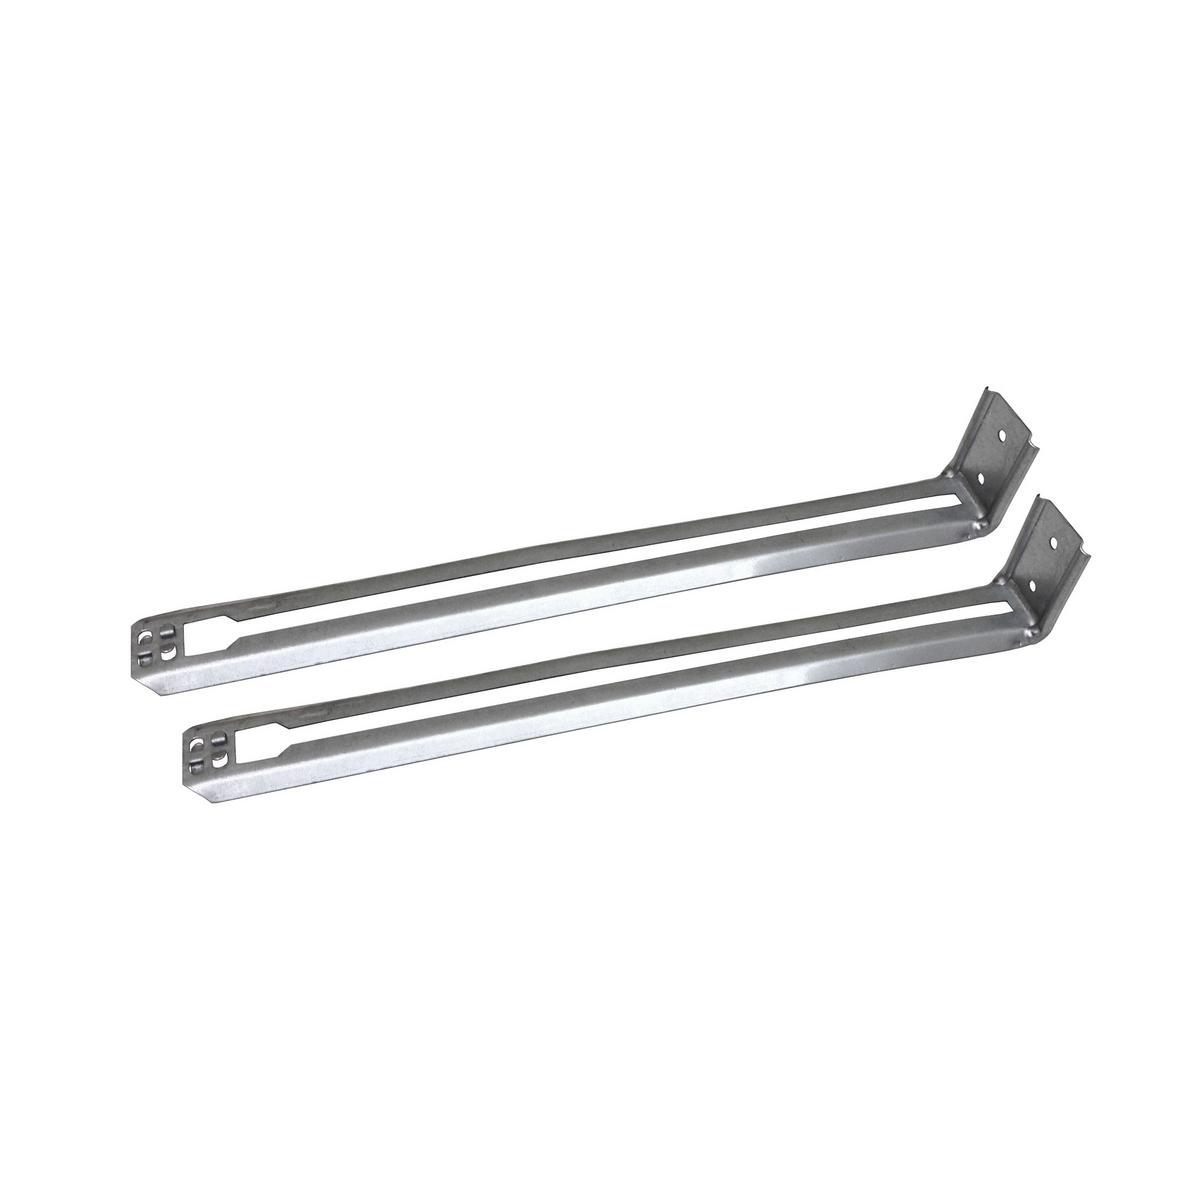 Hubbell P8739-01 Recessed accessory - Bar hangers for joist for use with separate recessed housings and trims.  ; Bar hangers for joist. ; For use with recessed housings.